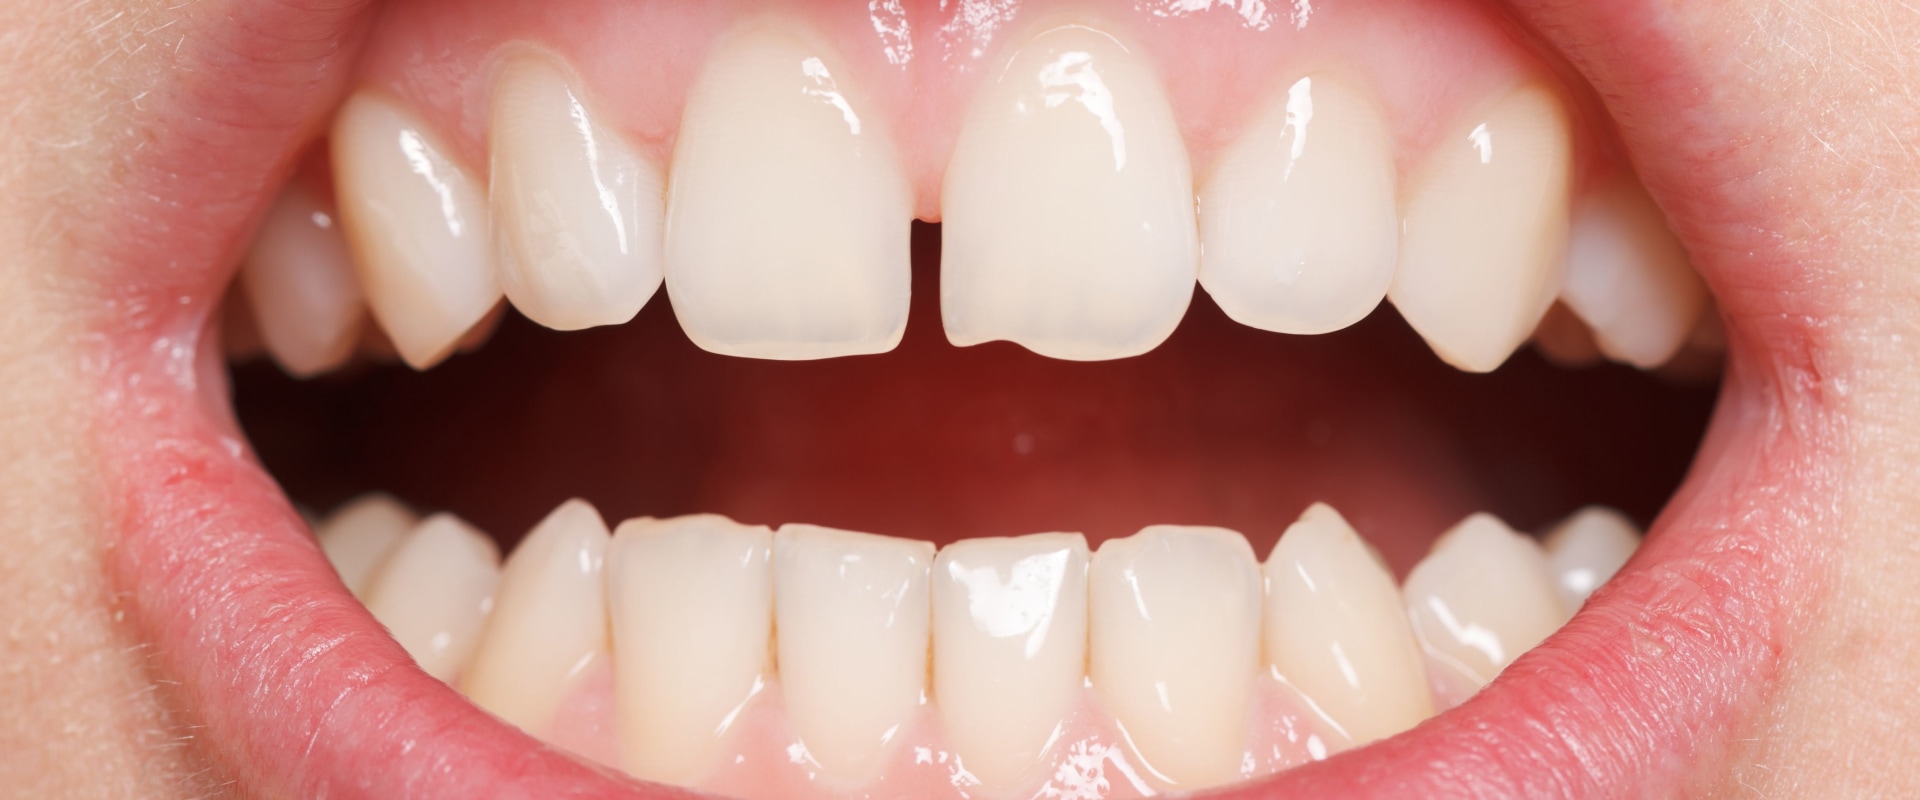 Exploring Procedure and Aftercare for Dental Bonding